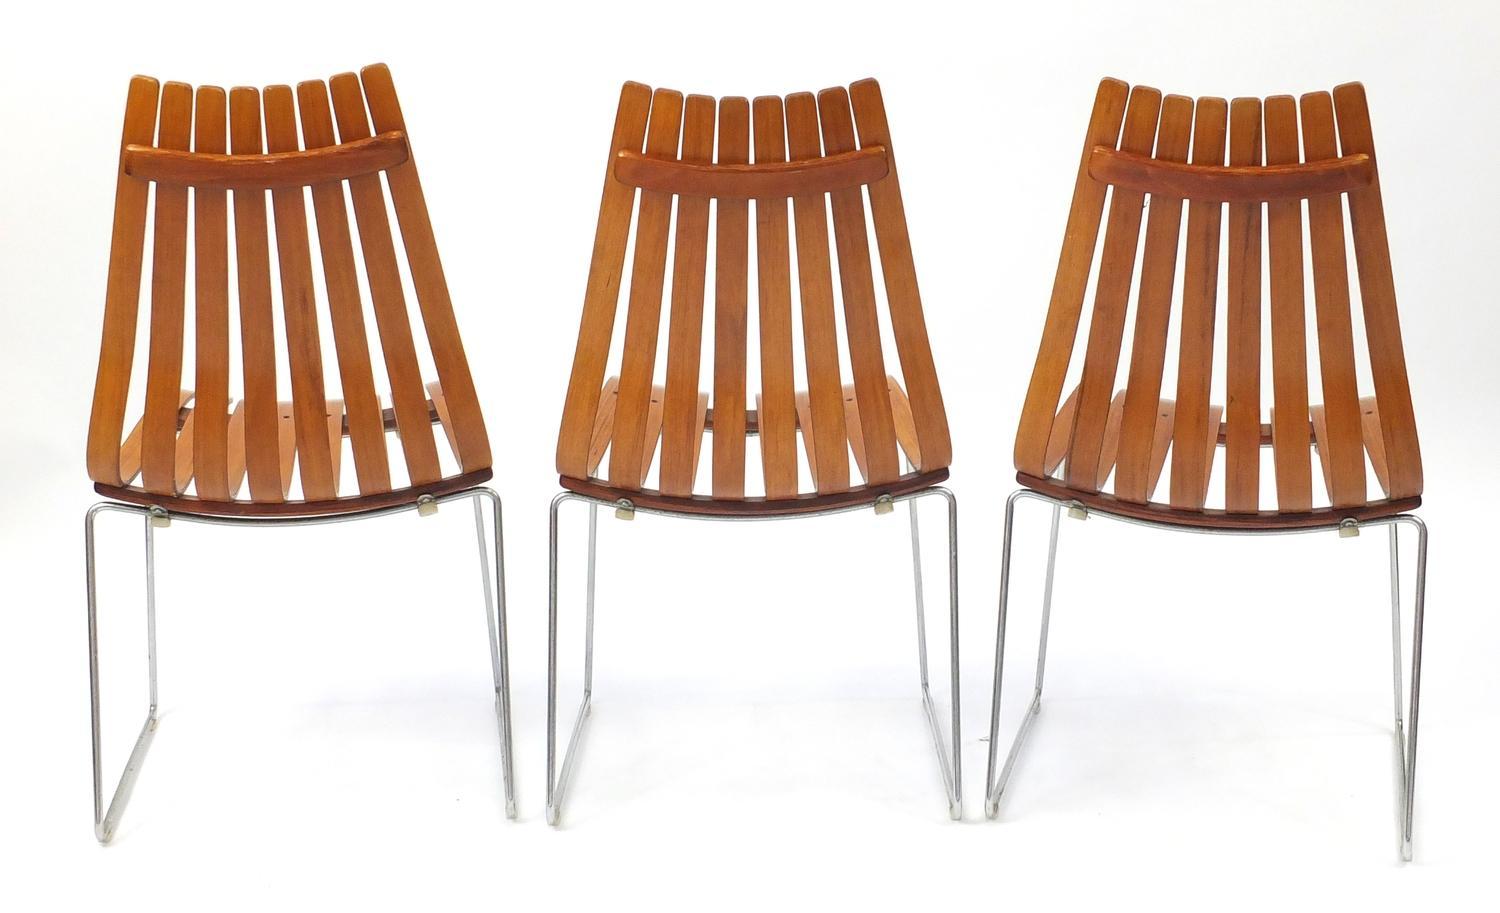 Hans Brattrud Rosewood Dining Table & Six Scandia Chairs, Hove Mobler circa 1965 (Rosenholz)